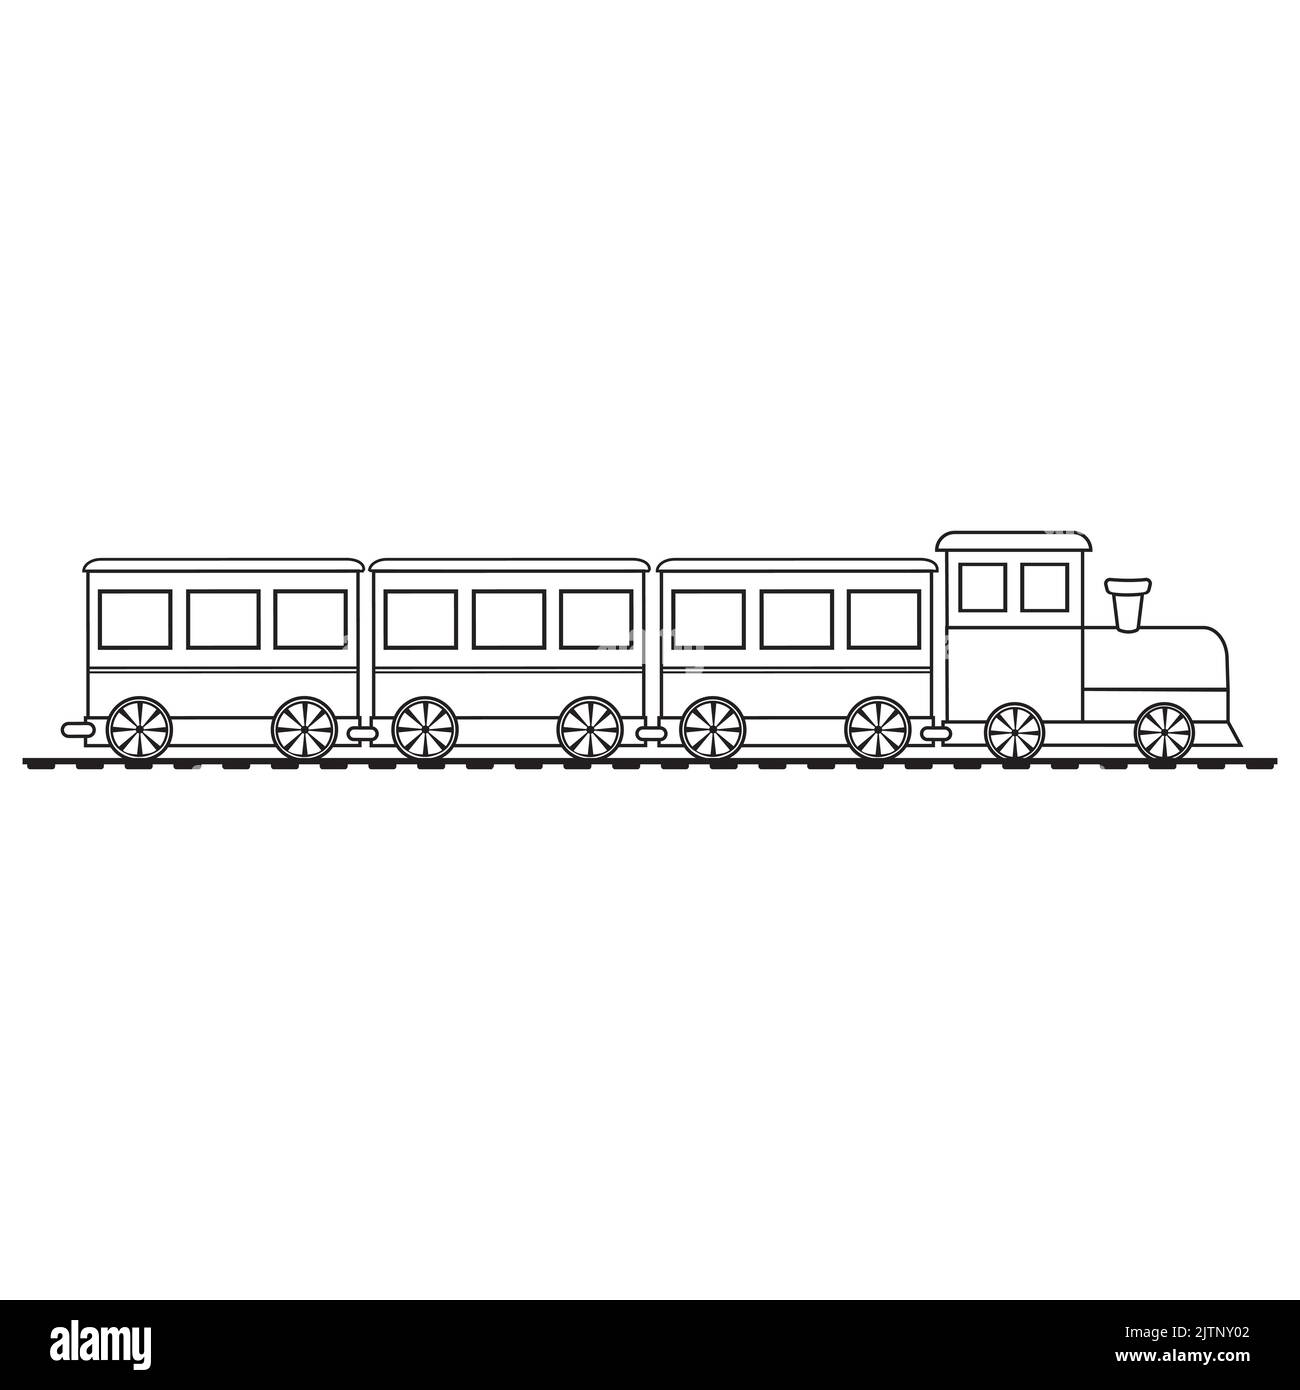 Coloring book for kids train, black contour line, vector isolated doodle illustration. Stock Vector